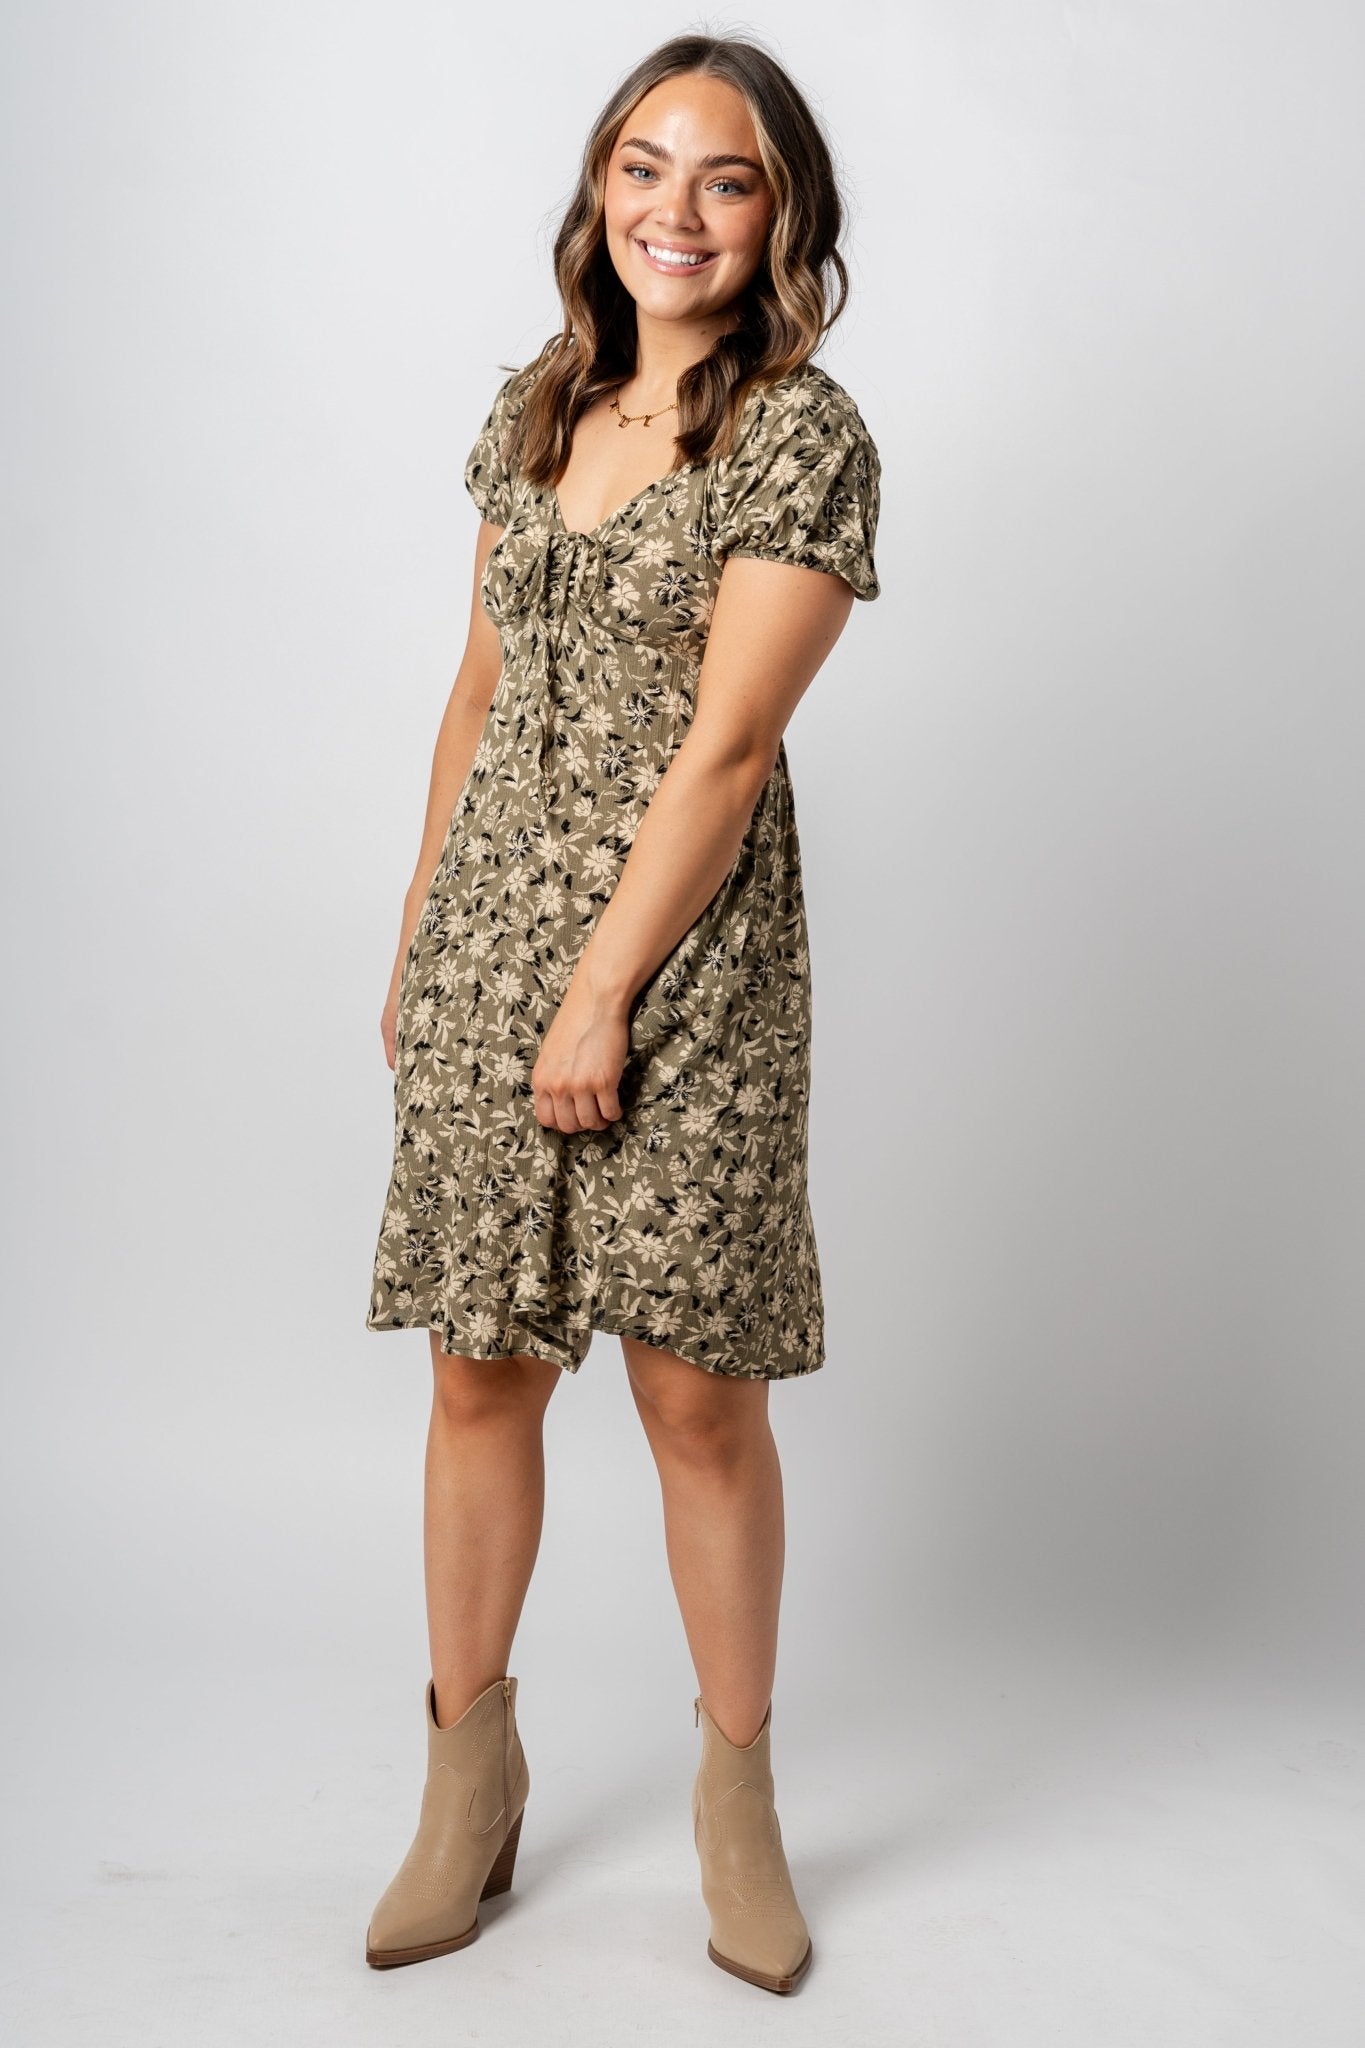 Ruched floral midi dress olive - Trendy Dresses - Fashion Dresses at Lush Fashion Lounge Boutique in Oklahoma City